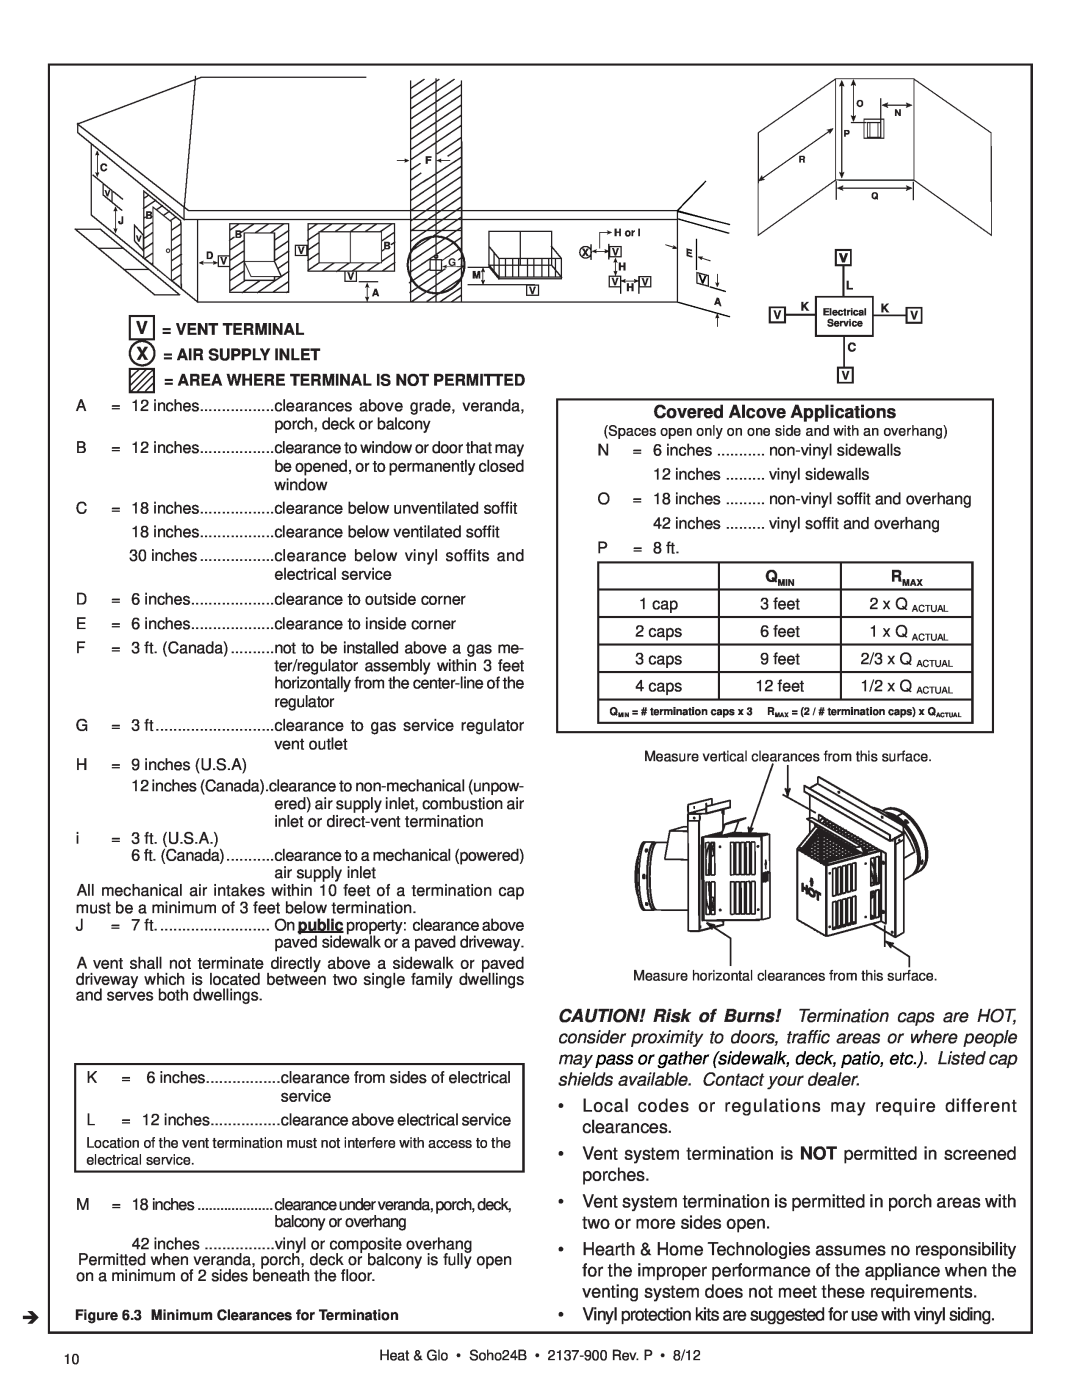 Heat & Glo LifeStyle 2137-900 owner manual Covered Alcove Applications, V= Vent Terminal X = Air Supply Inlet 